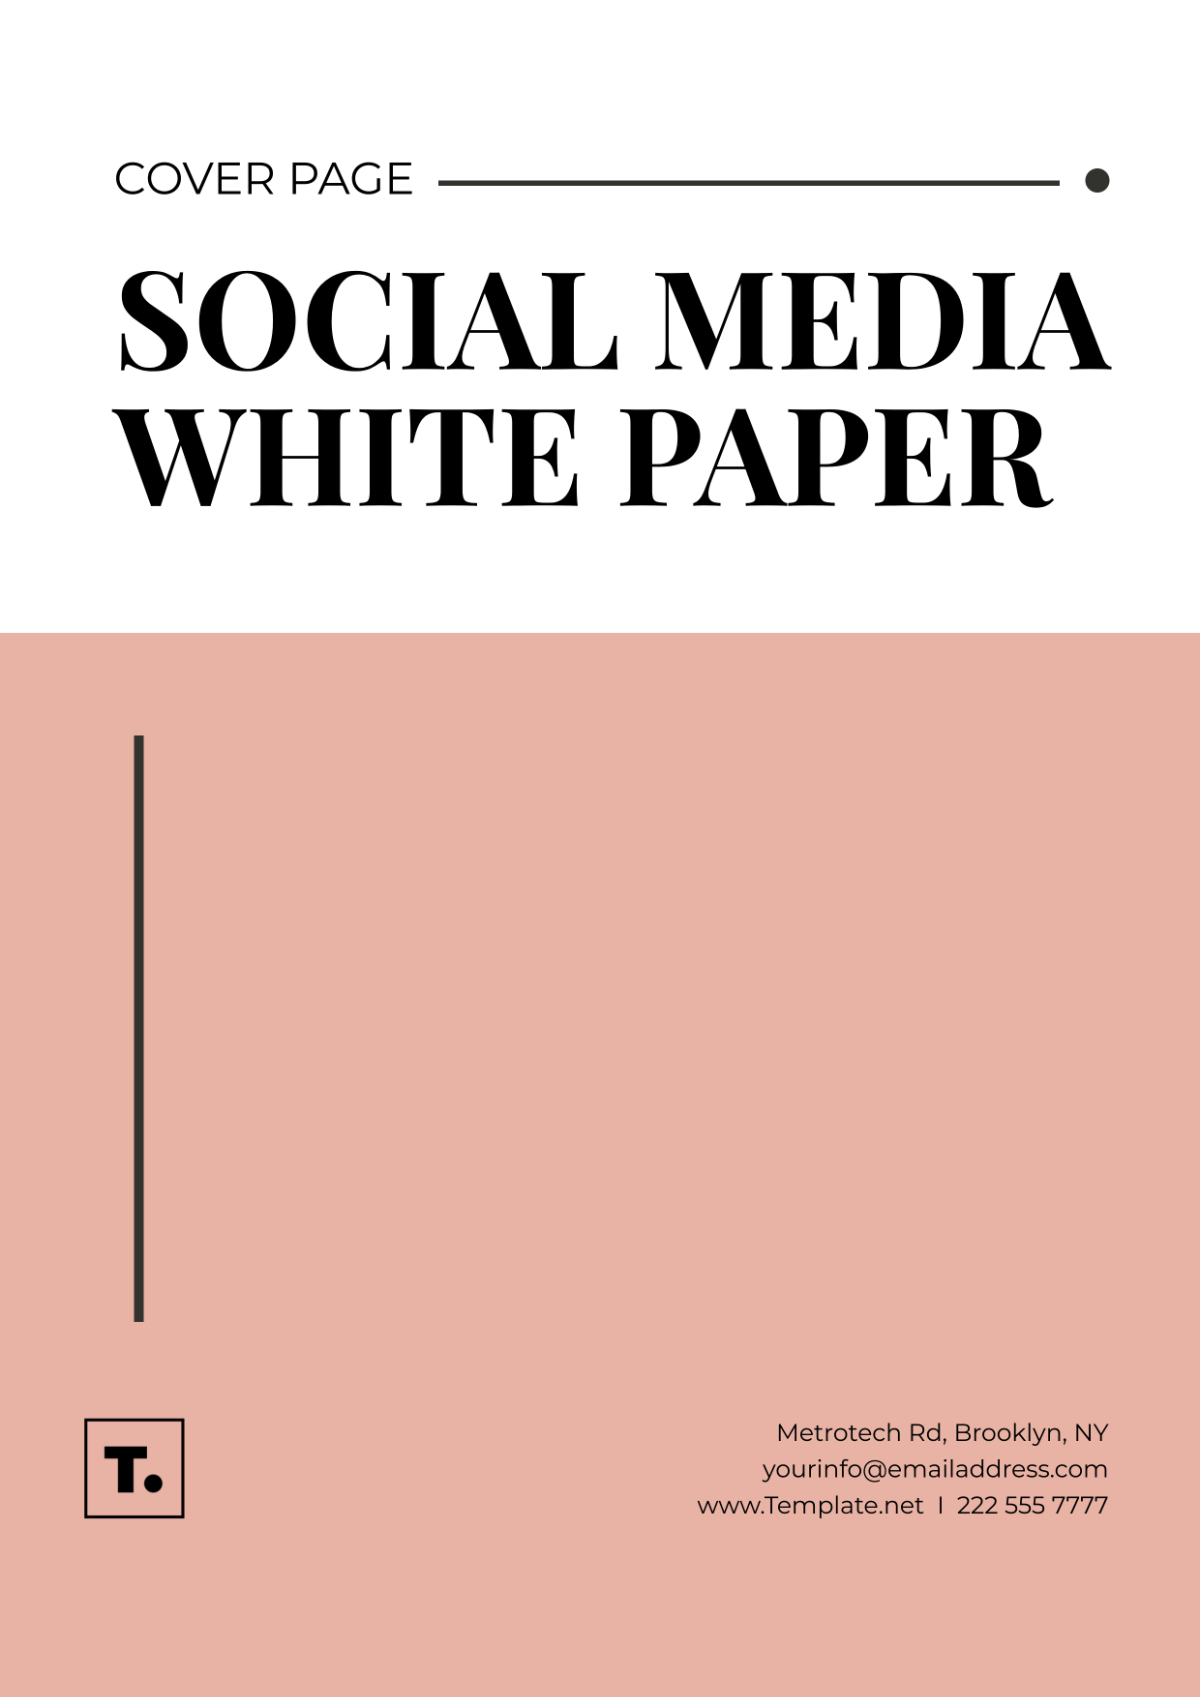 Social Media White Paper Cover Page